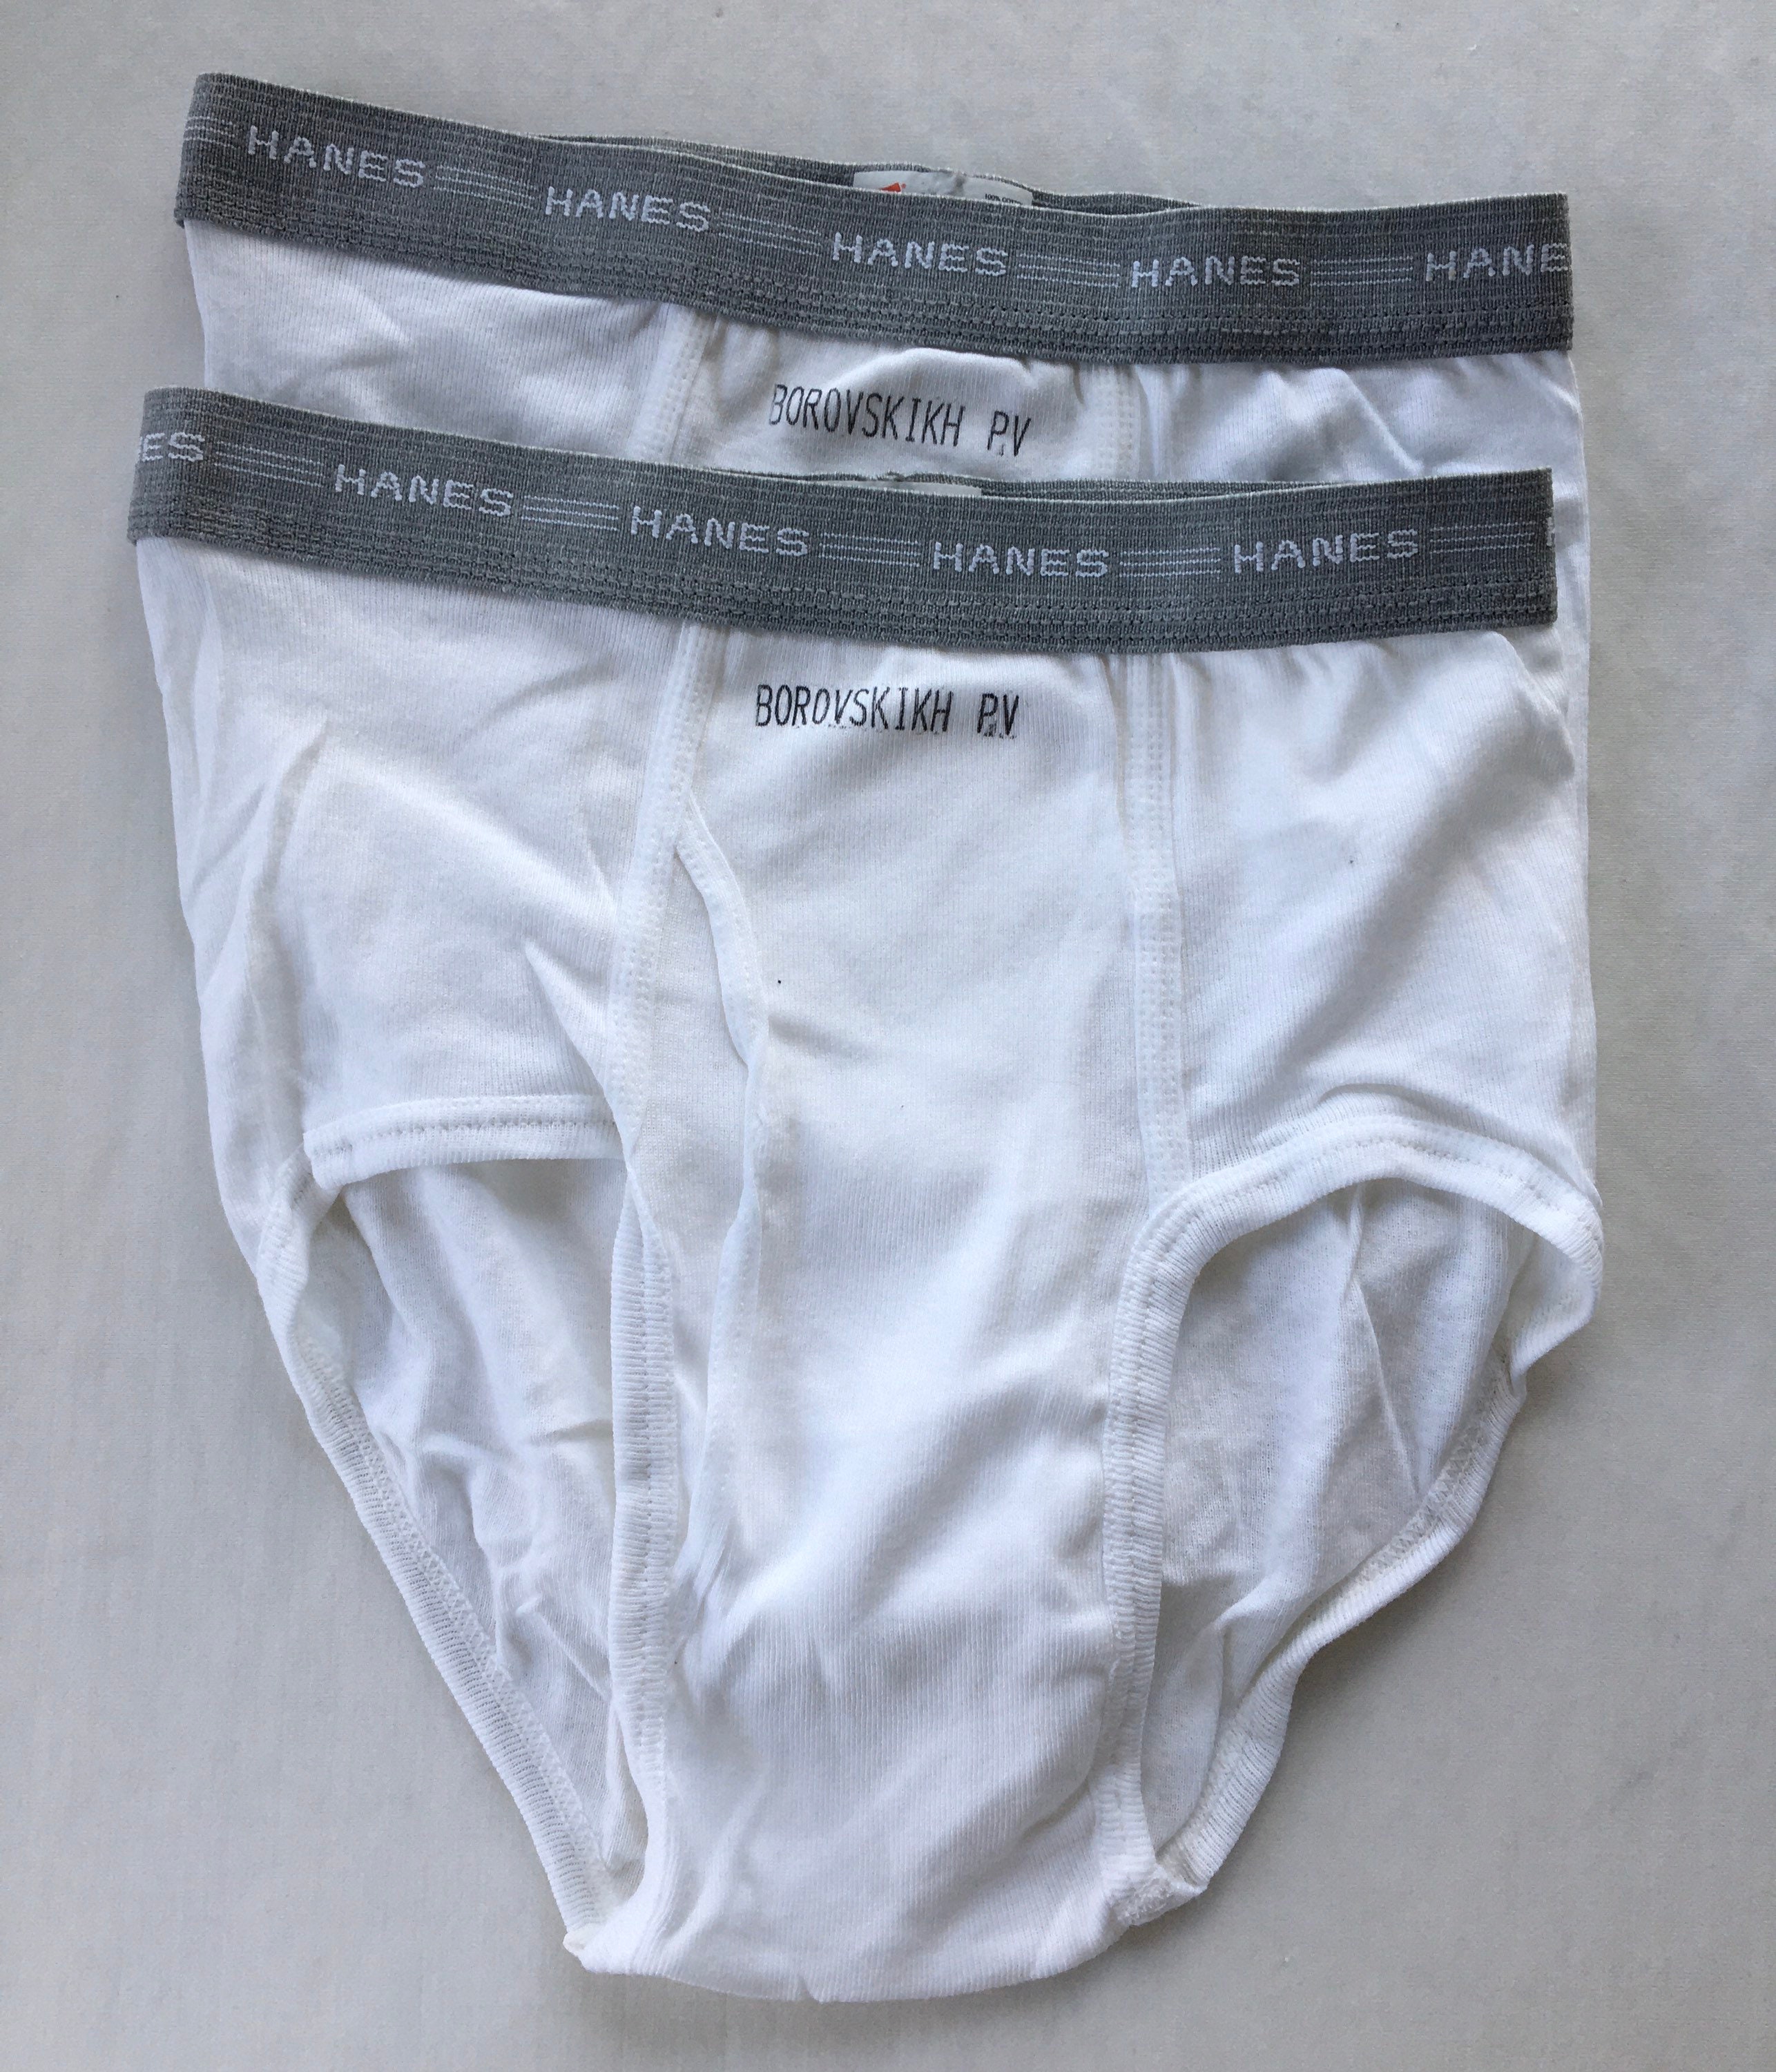 Vintage Hanes Briefs Cotton Underwear Tighty Whities Mens Size 32 Lot Of 2